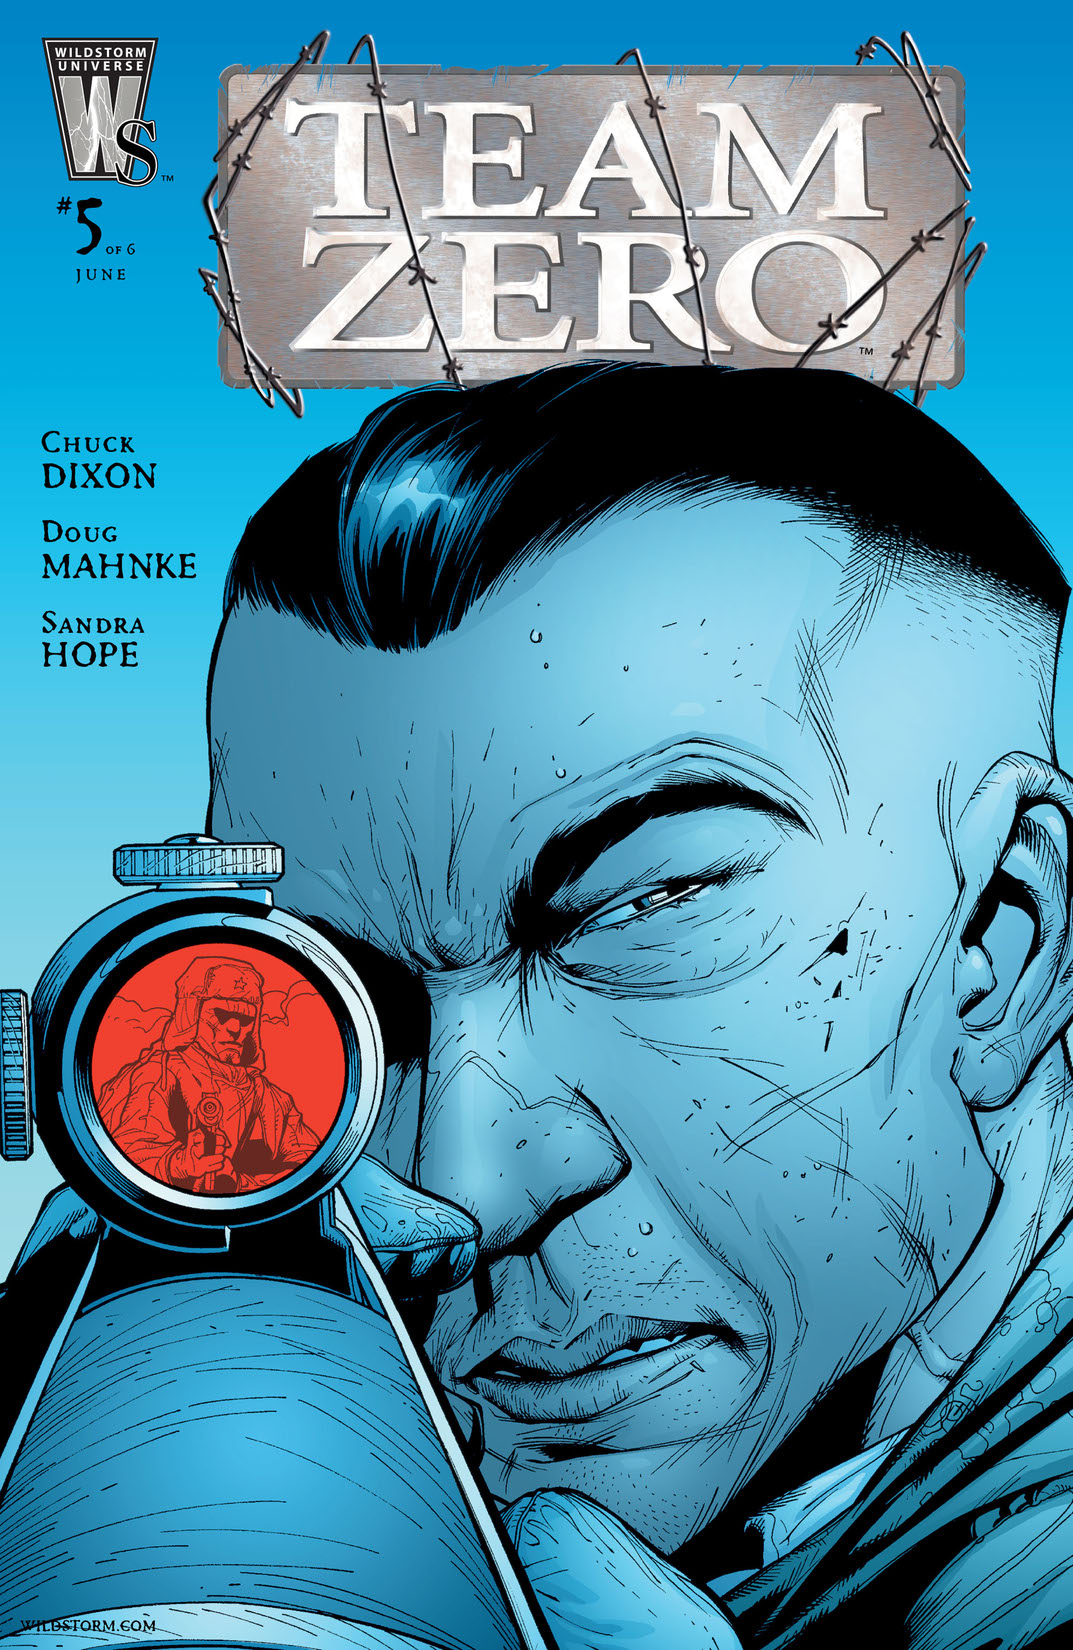 Team Zero #5 preview images